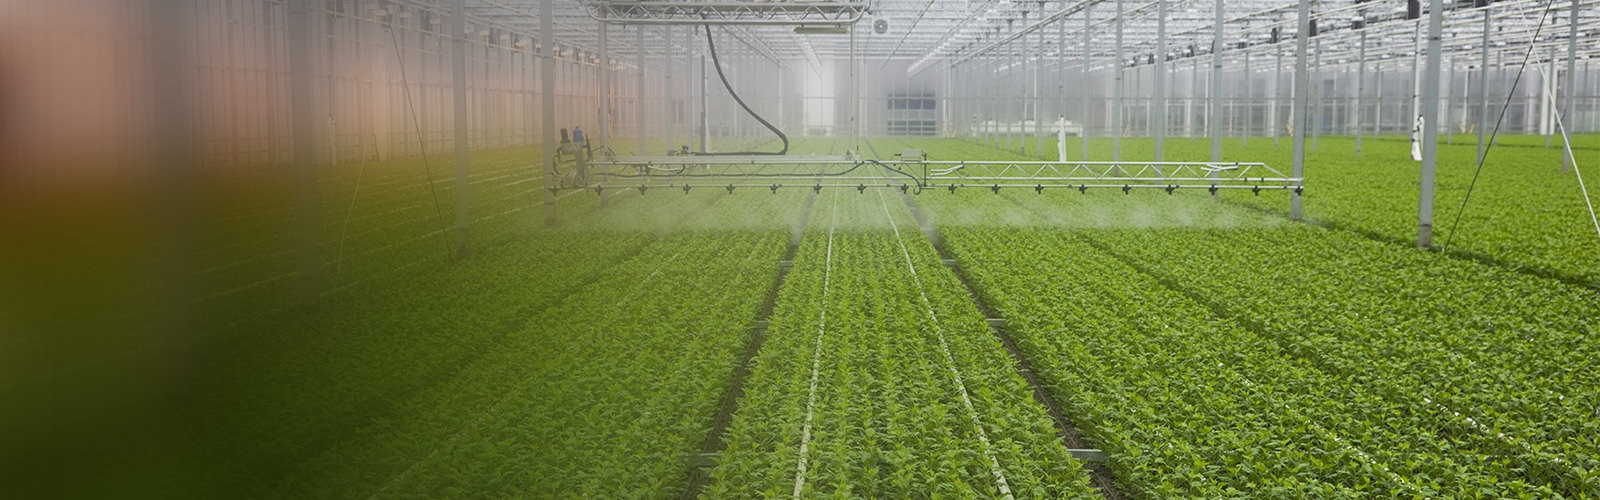 "Plant irrigation in greenhouse, please see also my other images of greenhouses, plants and flowers in my lightbox:"